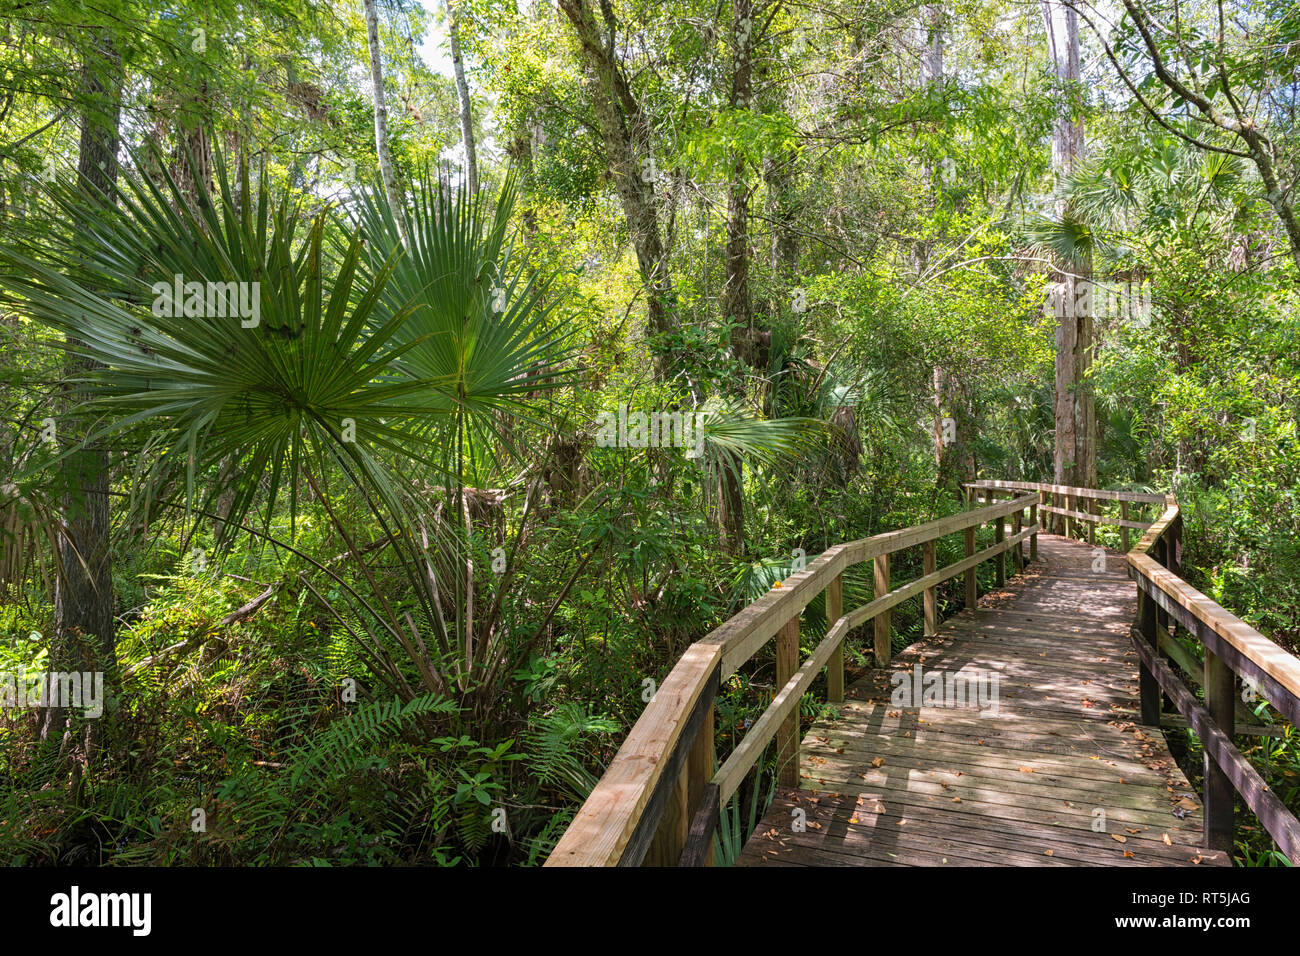 United States of America, Florida, Everglades, Copeland, Boardwalk through a swamp in the Fakahatchee Strand Preserve State Park Stock Photo